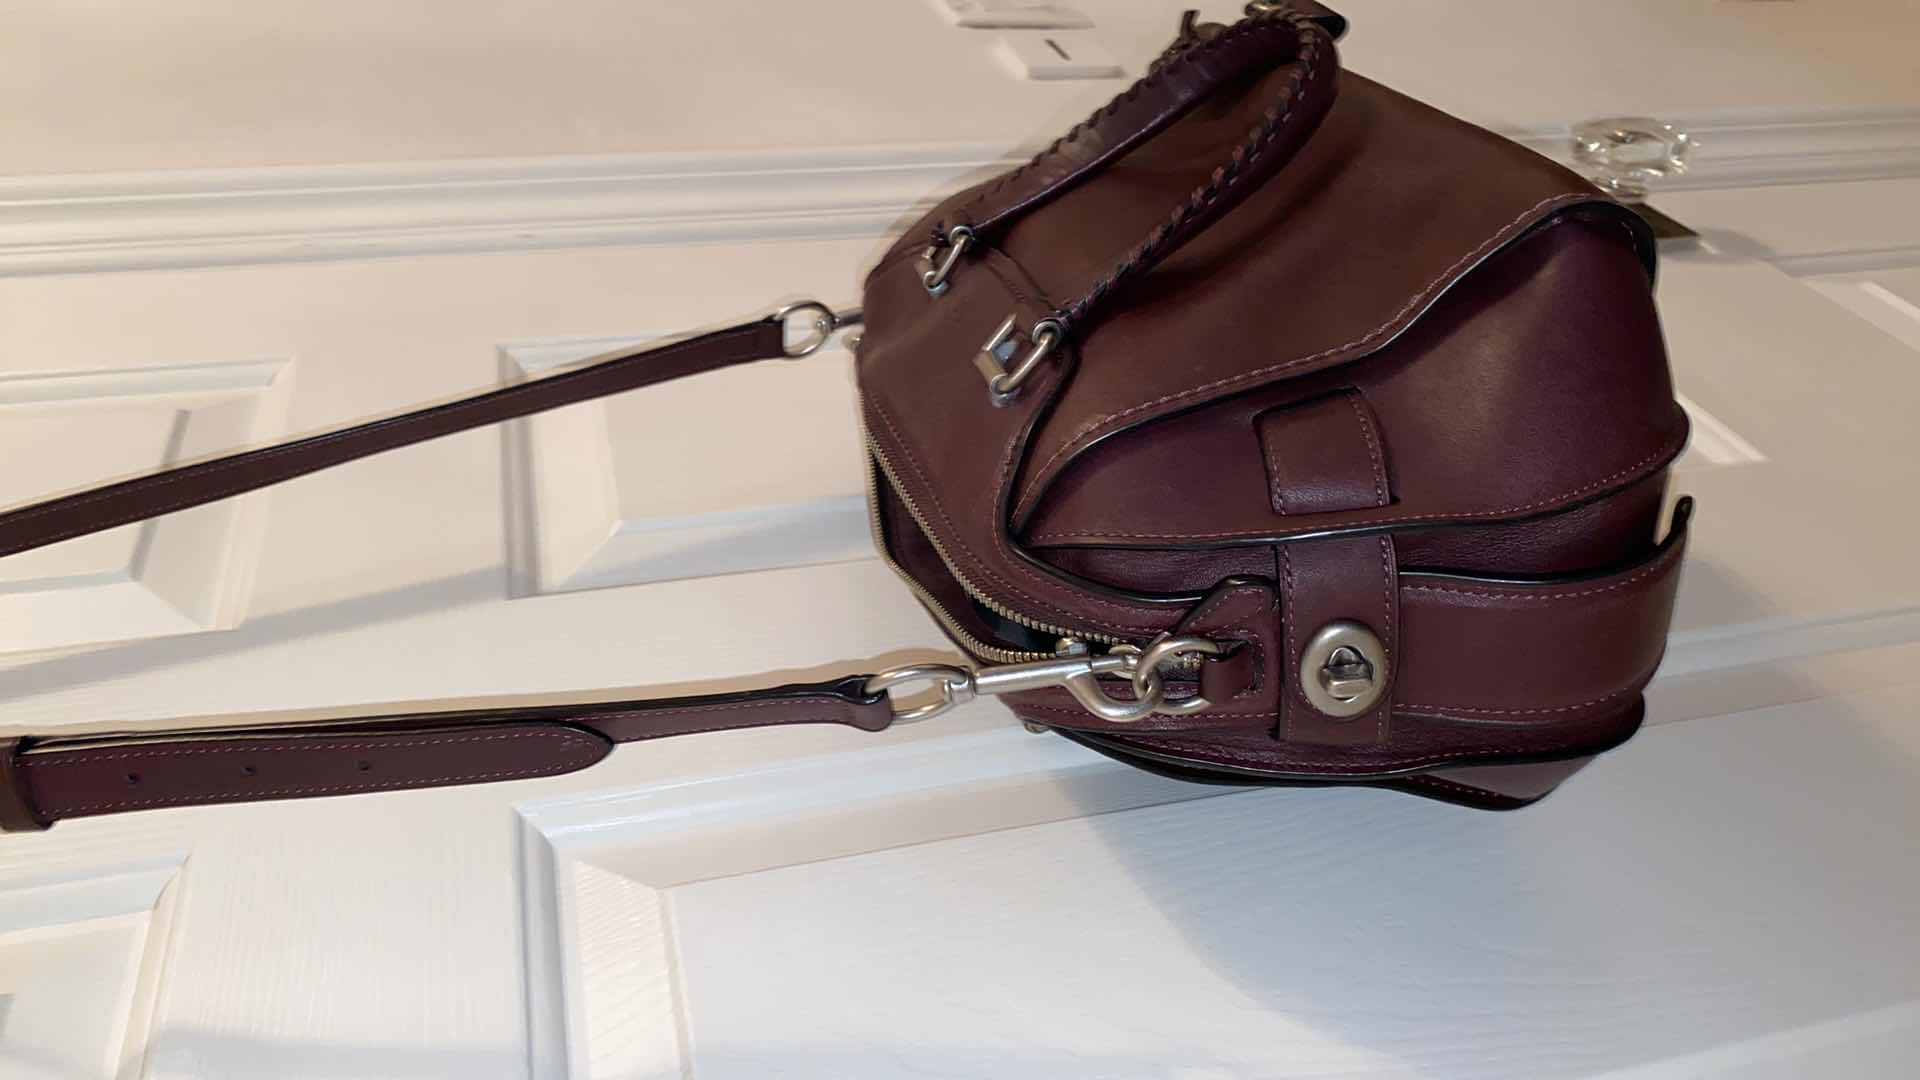 Photo 5 of $869 AUTHENTIC COACH ACE SATCHEL IN BURGUNDY WITH STRAP, WHIPSTITCHED HANDLES AND GUNMETAL HARDWARE INCLUDES DUSTBAG- NON RETURABLE - FINAL SALE